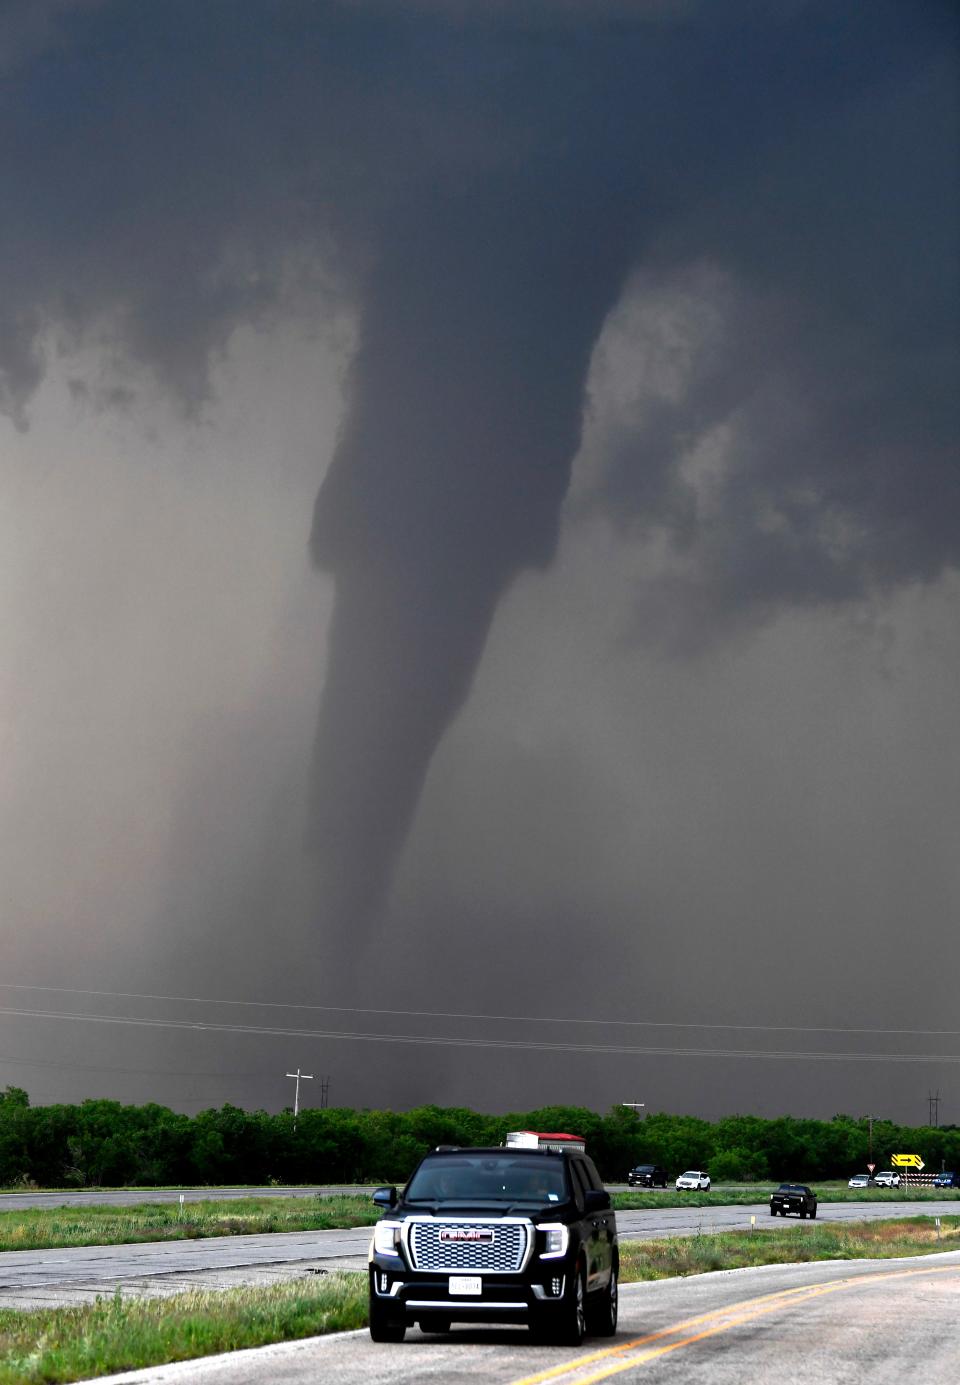 A tornado spins west of Hawley as cars pass on U.S. 277 Thursday.